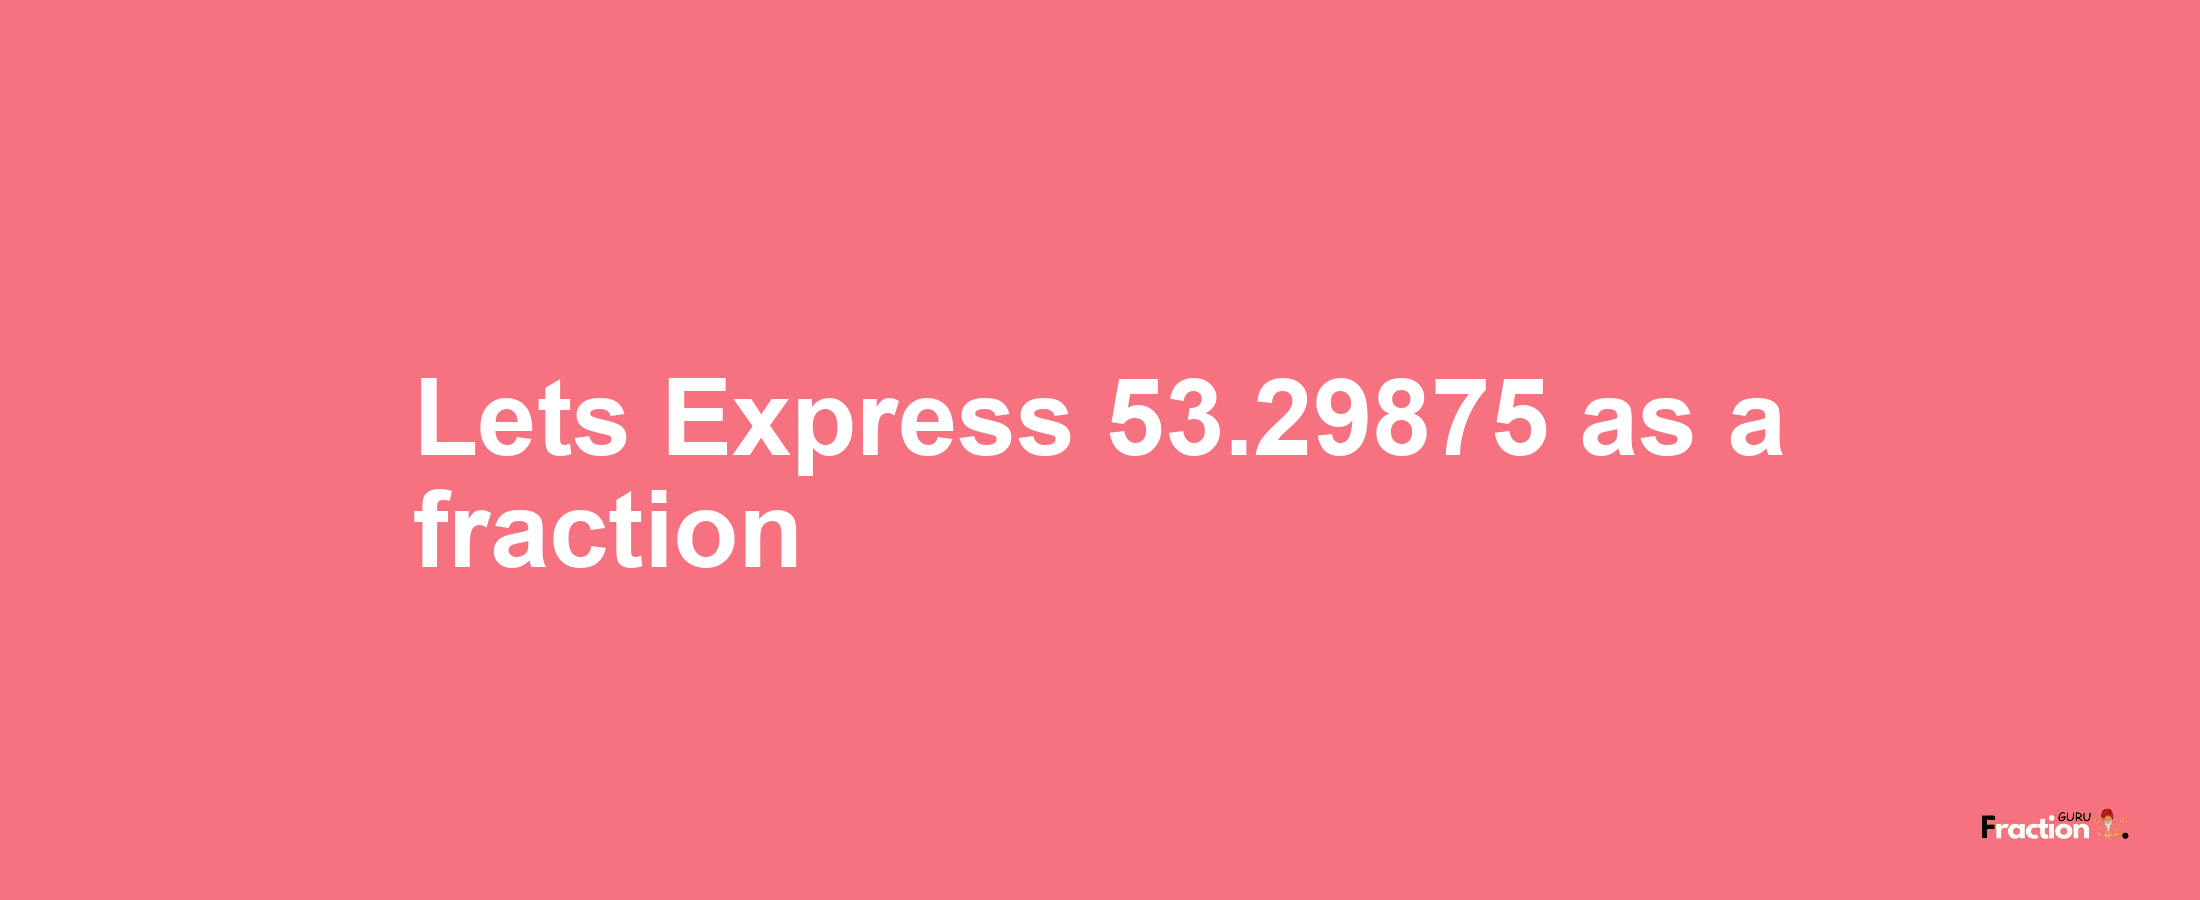 Lets Express 53.29875 as afraction